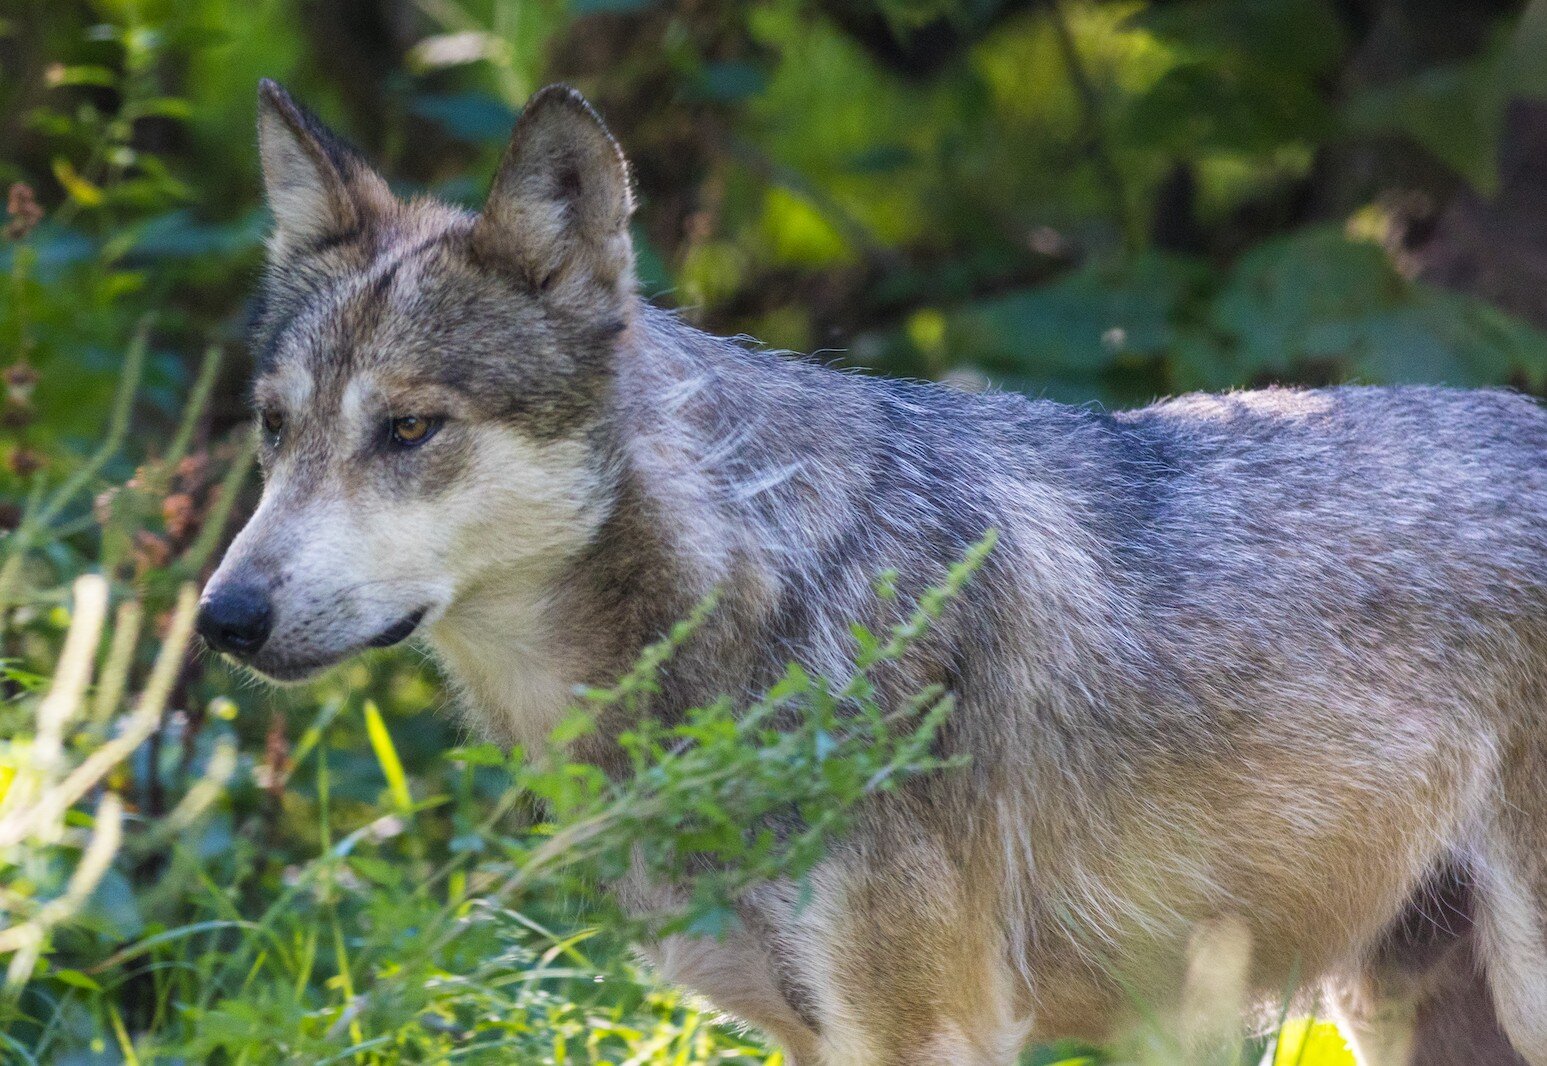 The Mexican Wolf exhibit is one of the areas of Binder Park Zoo that confinues to evolve.